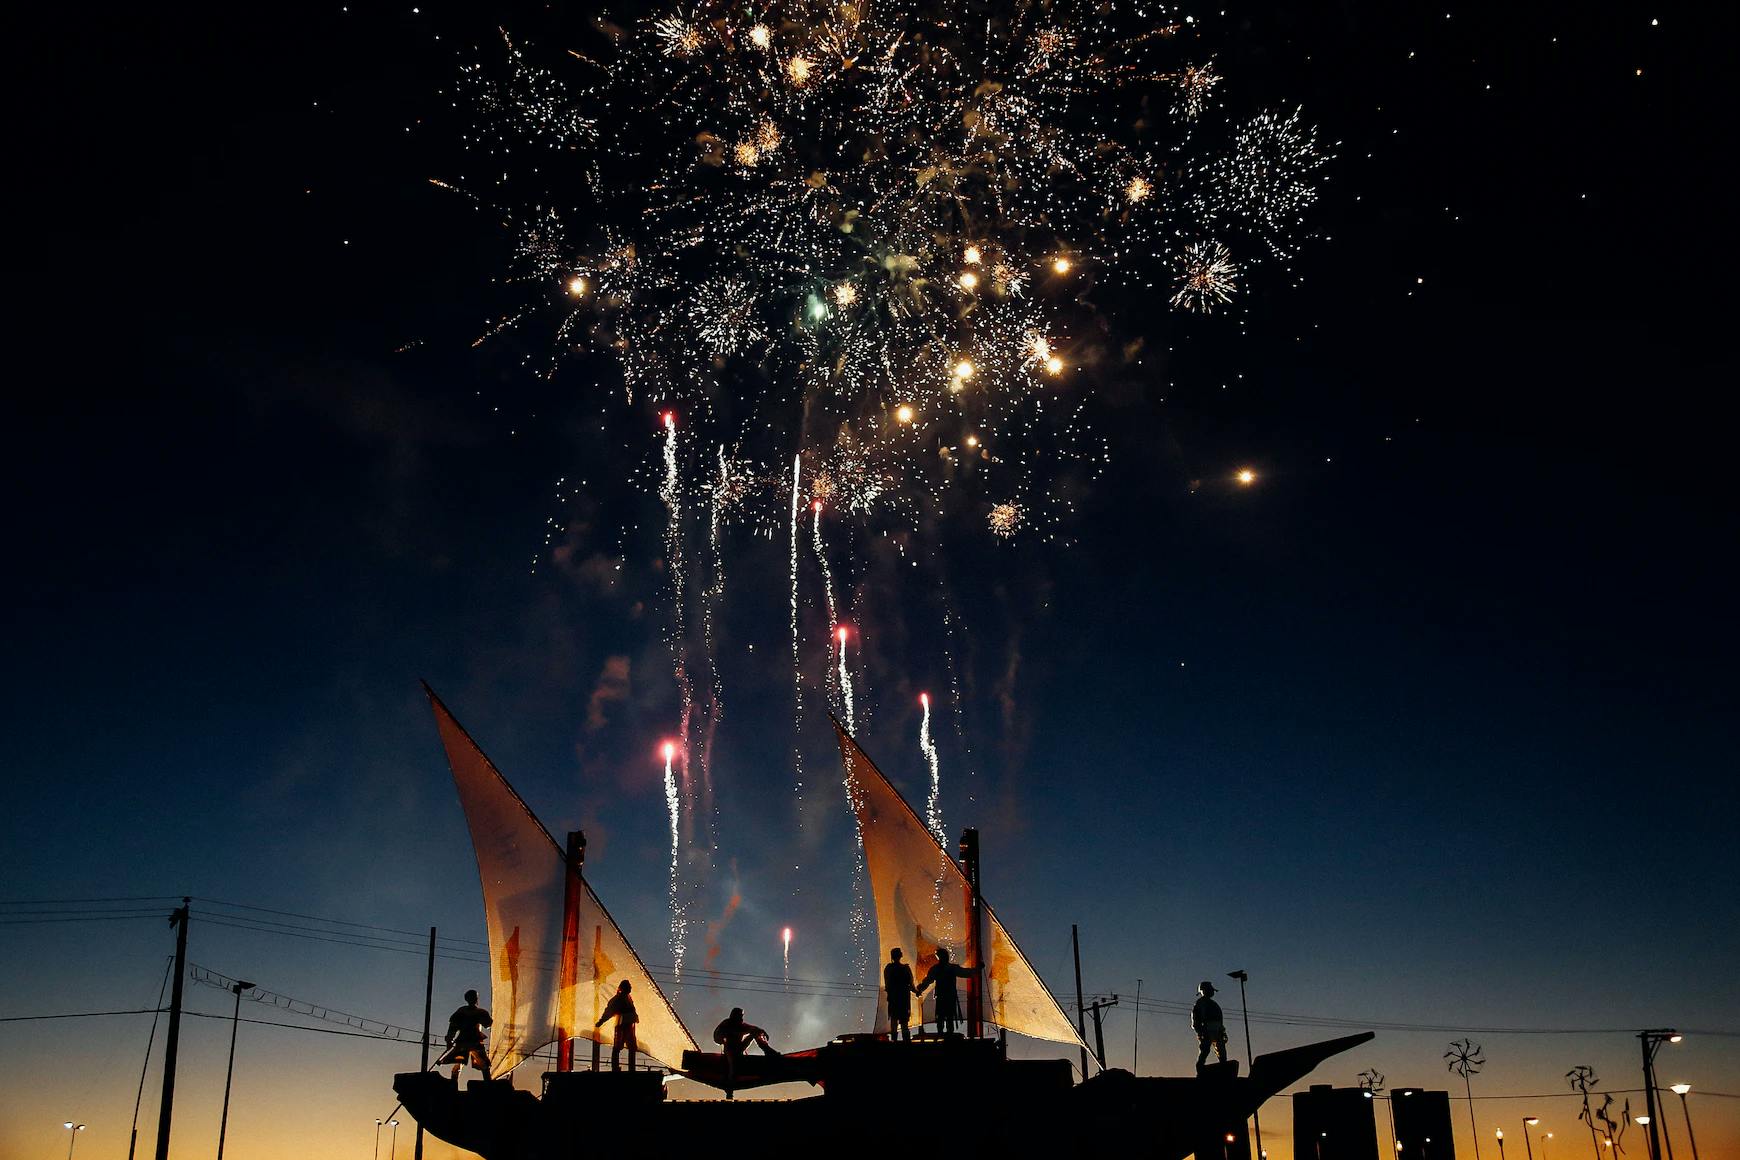 Viewing fireworks from a vessel